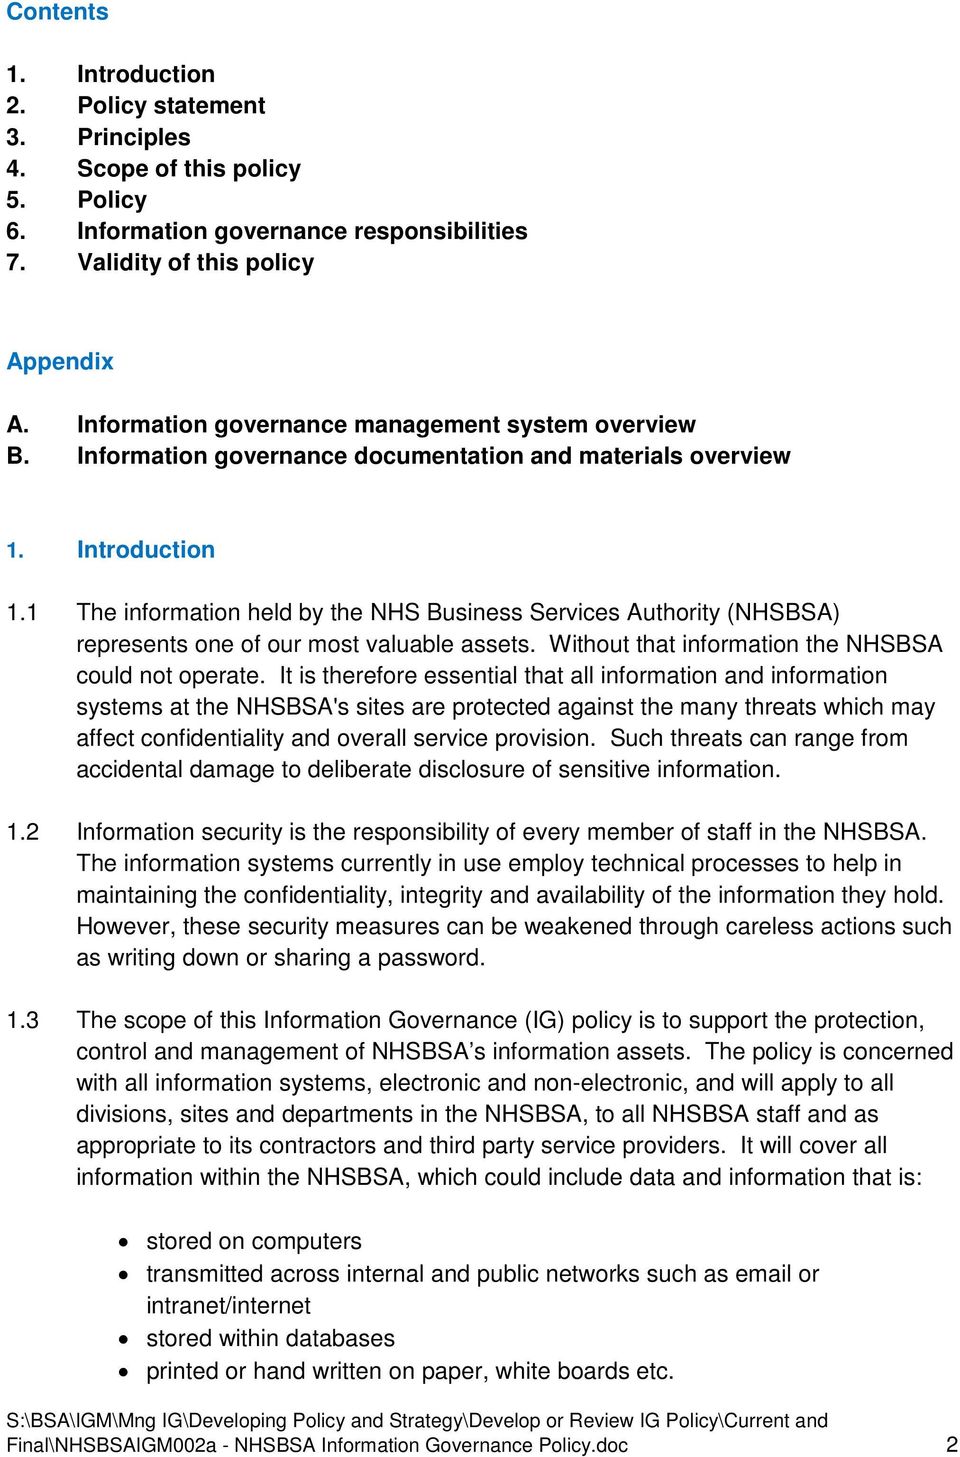 1 The information held by the NHS Business Services Authority (NHSBSA) represents one of our most valuable assets. Without that information the NHSBSA could not operate.